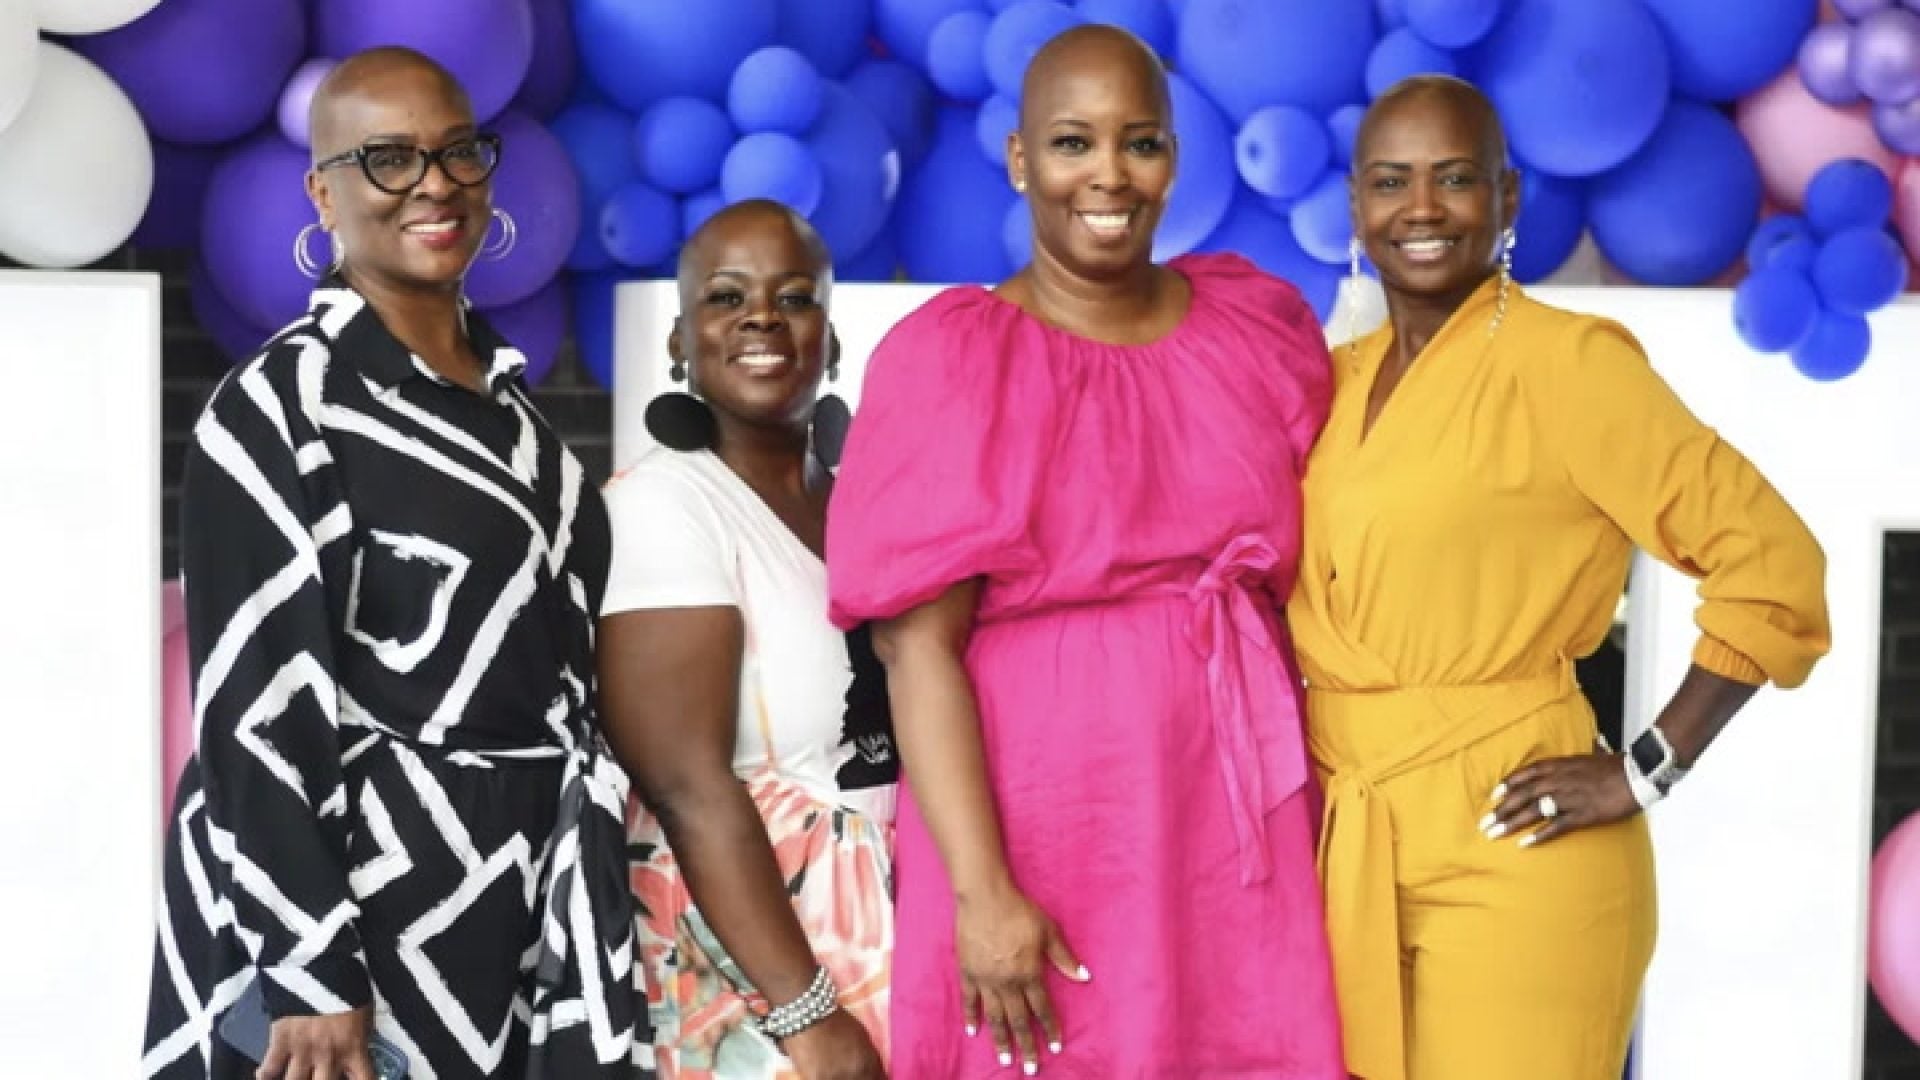 WATCH: In My Feed – What’s Baldiecon? The Empowerment Conference Redefining Traditional Beauty Standards